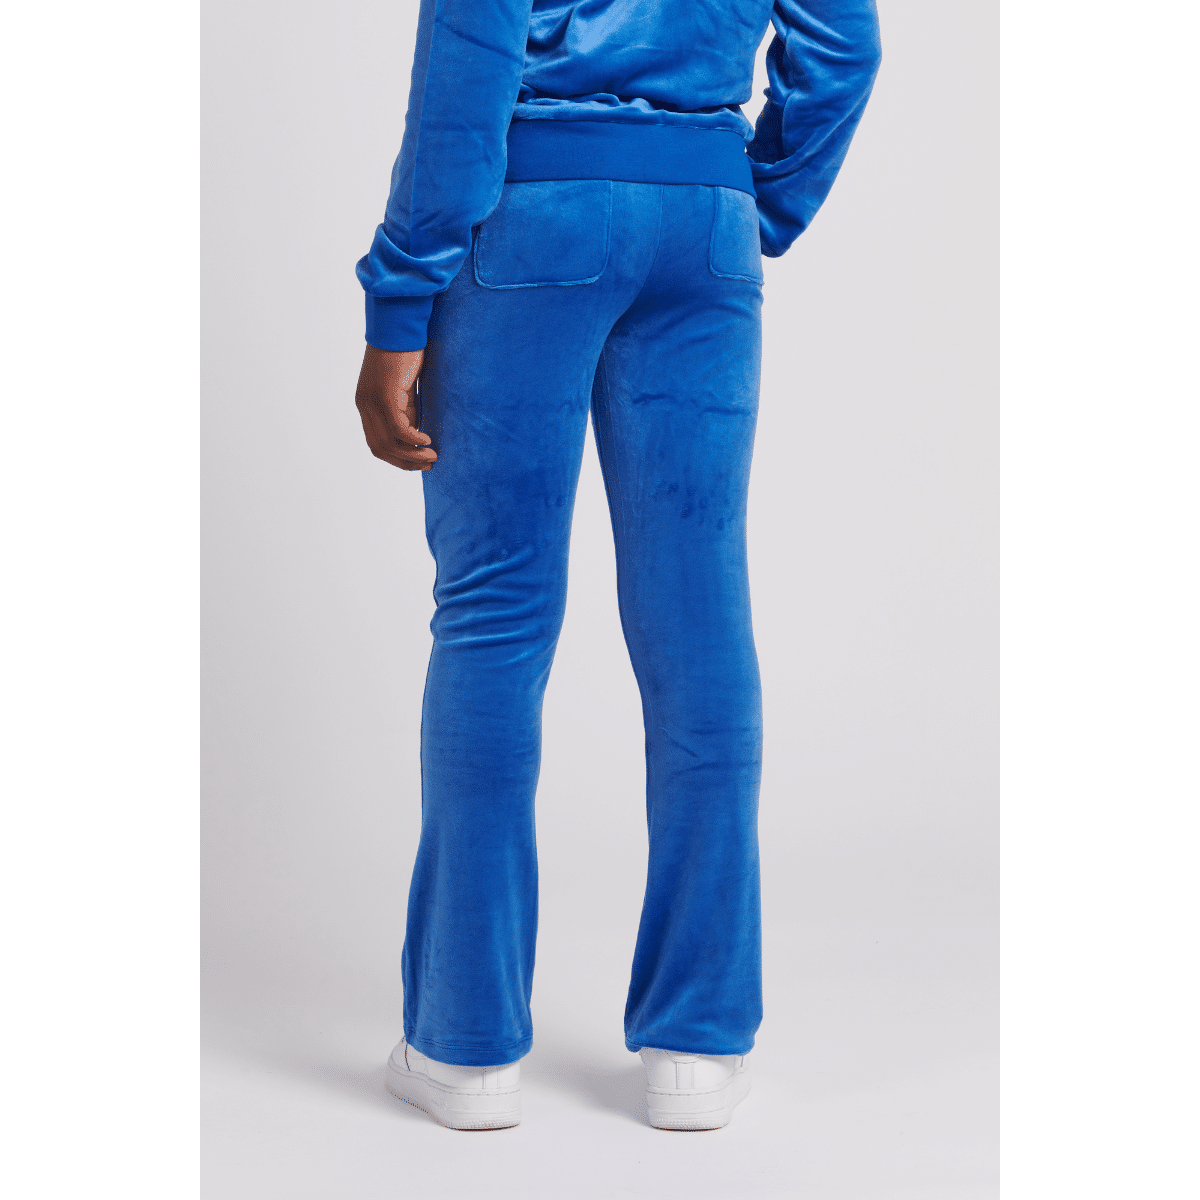 juicy couture girls blue velour trousers back view on model